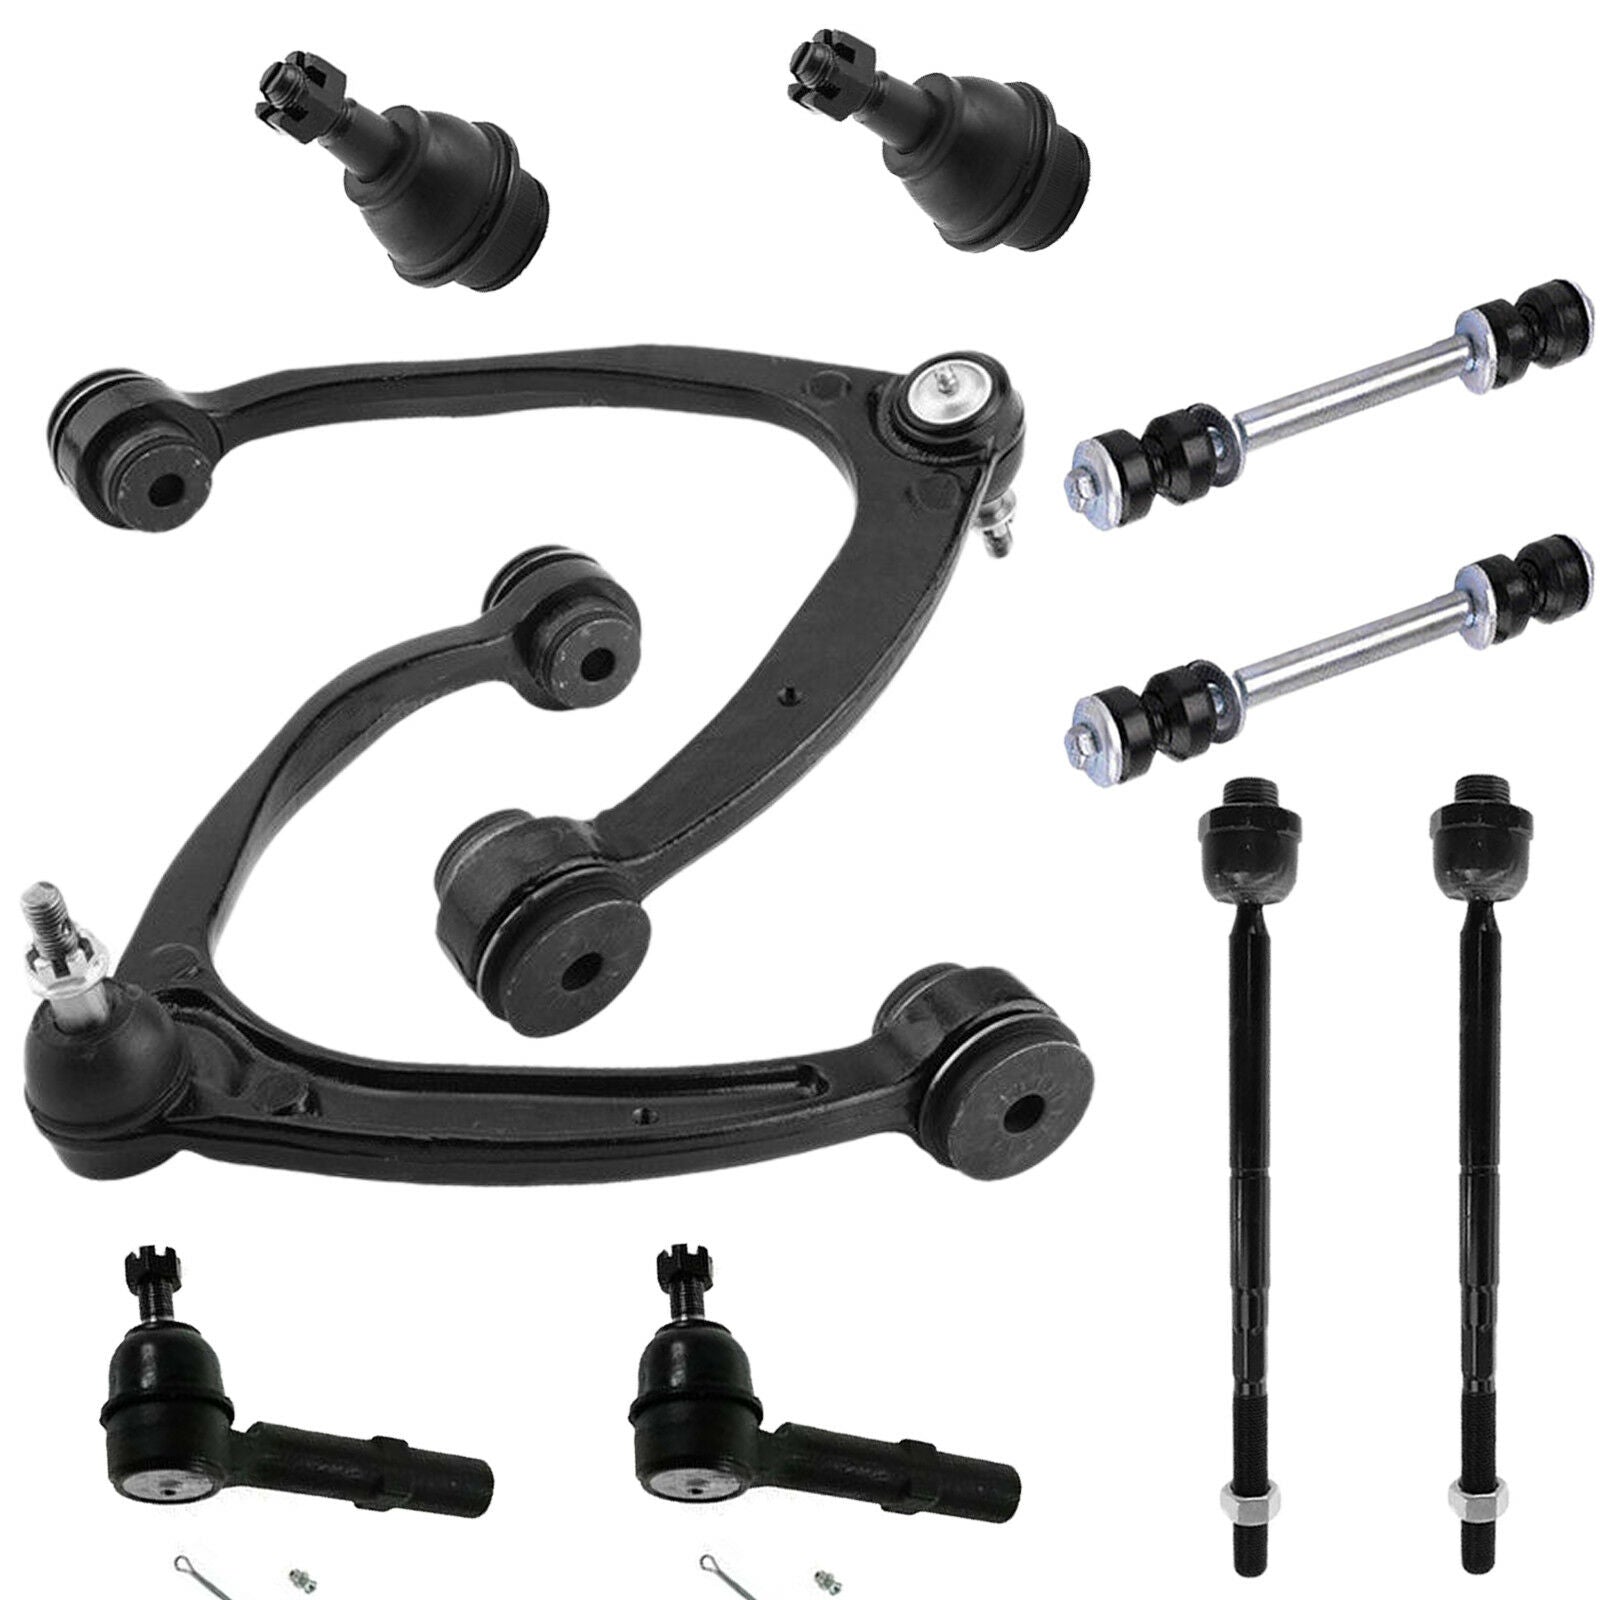 MotorbyMotor 10Pc Front Upper Suspension Control Arm Ball Joint Sway Bar Fit 2007-2014 Cadillac Chevrolet GMC Control Arms Ball Joints Inner Outer Tie Rod Ends Links with Steel Lower Control Arms MotorbyMotor